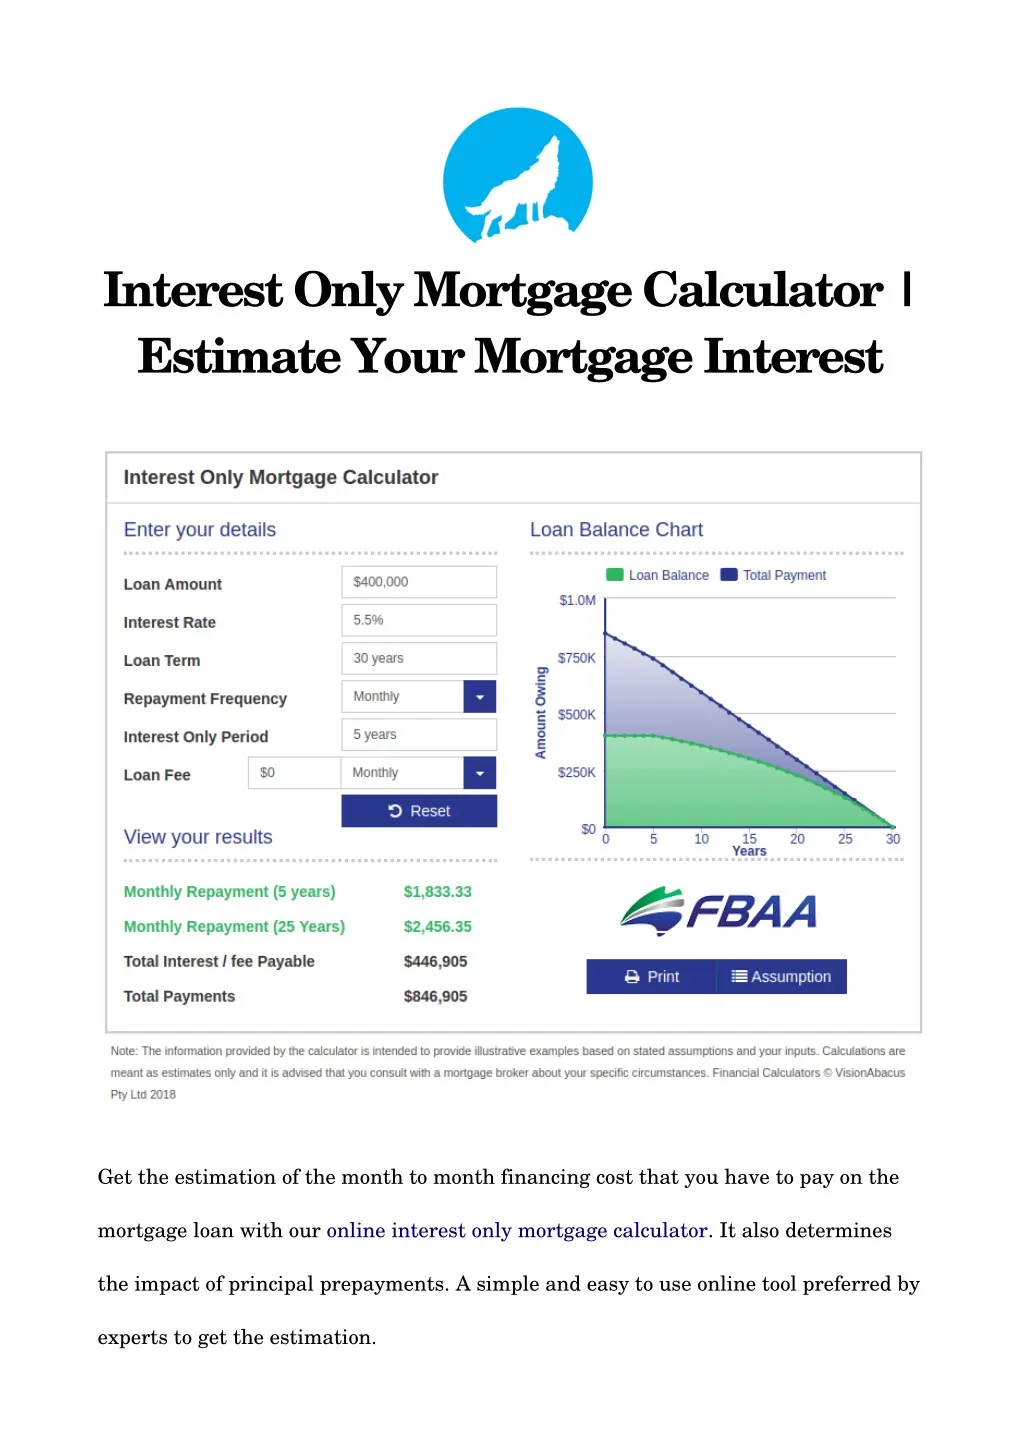 interest only mortgage calculator estimate your